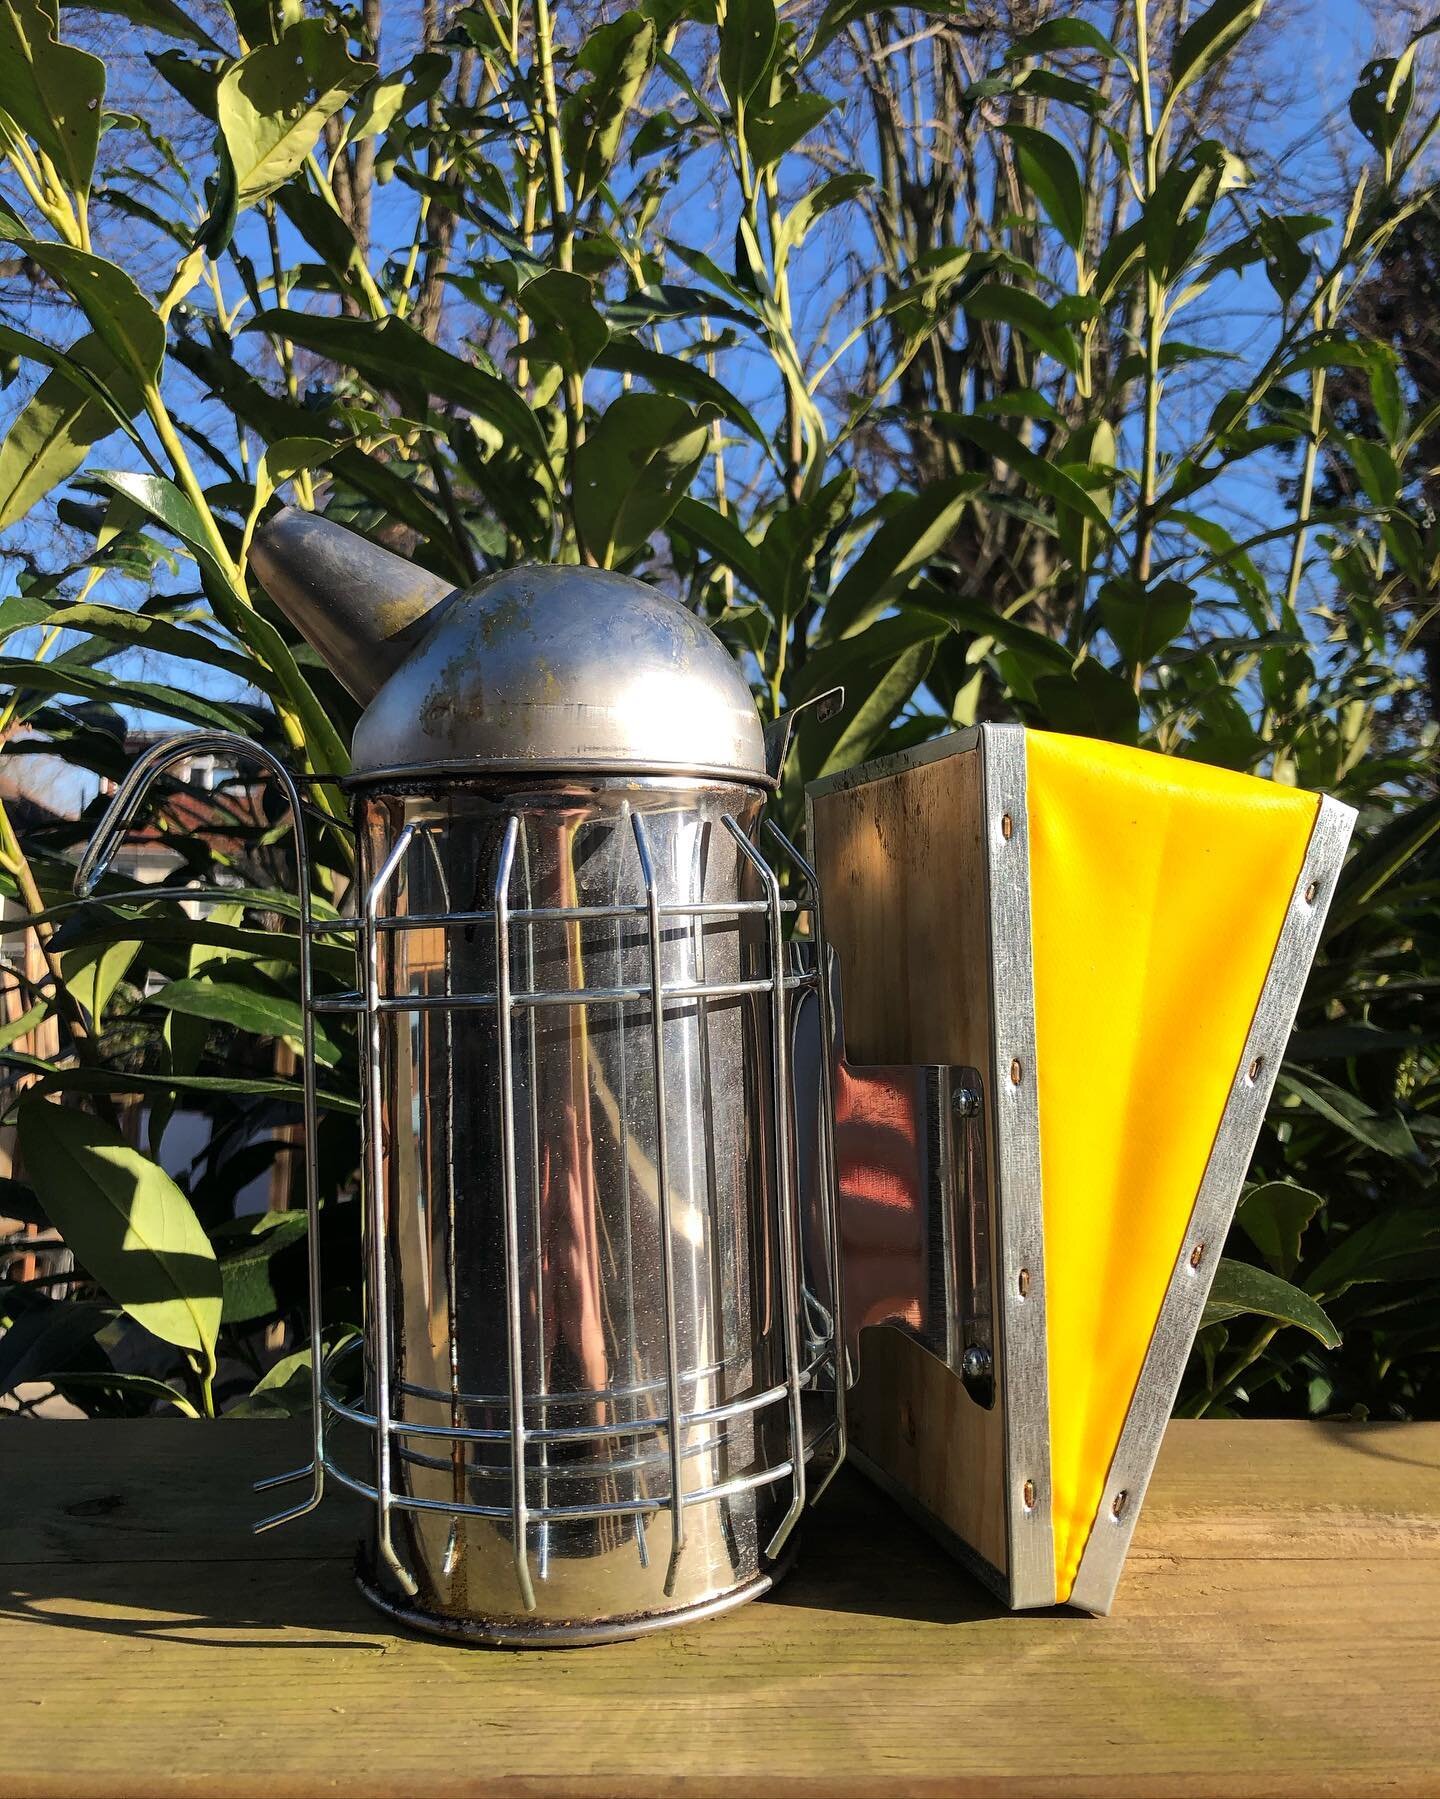 The bee smoker is a clever device used to calm honey bees, giving you an opportunity to open and work on the hive 🐝

Tried &amp; tested....it does not work on Girlfriends 🤷🏽&zwj;♂️
&bull;
&bull;
&bull;
&bull;
#thesustainablebeekeeper #sustainableb